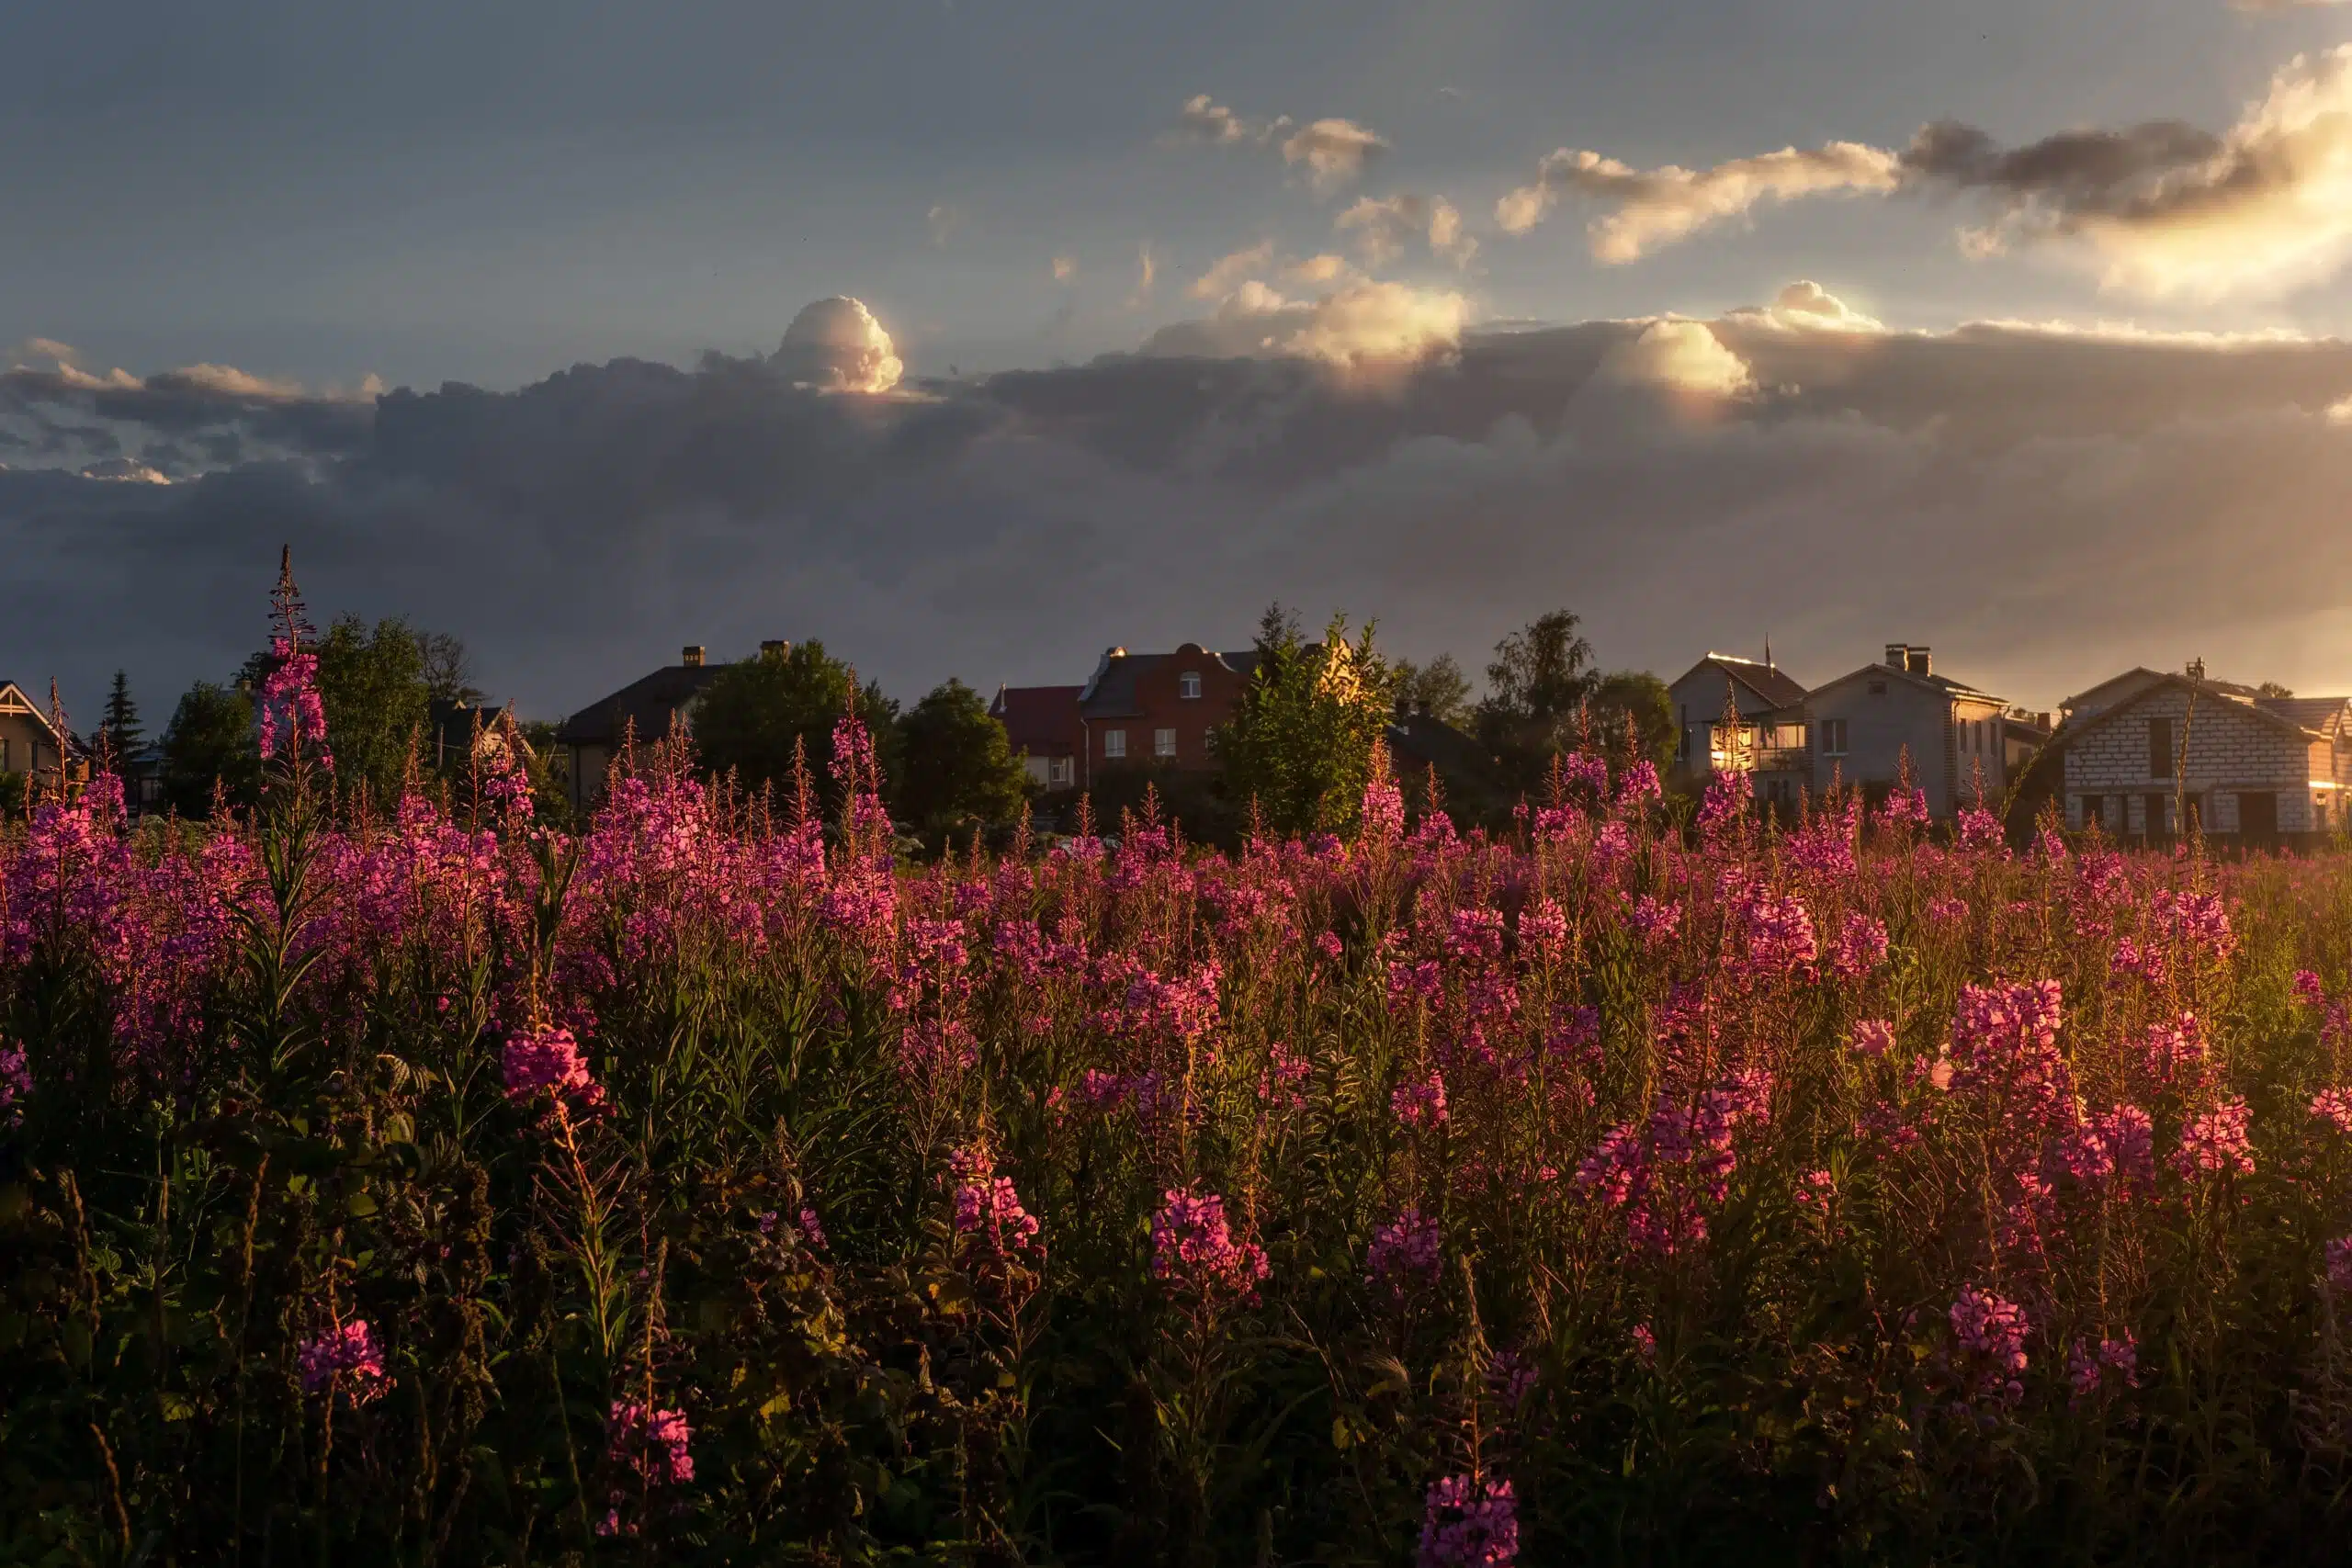 Beautiful evening landscape at sunset with a field of flowering cypress